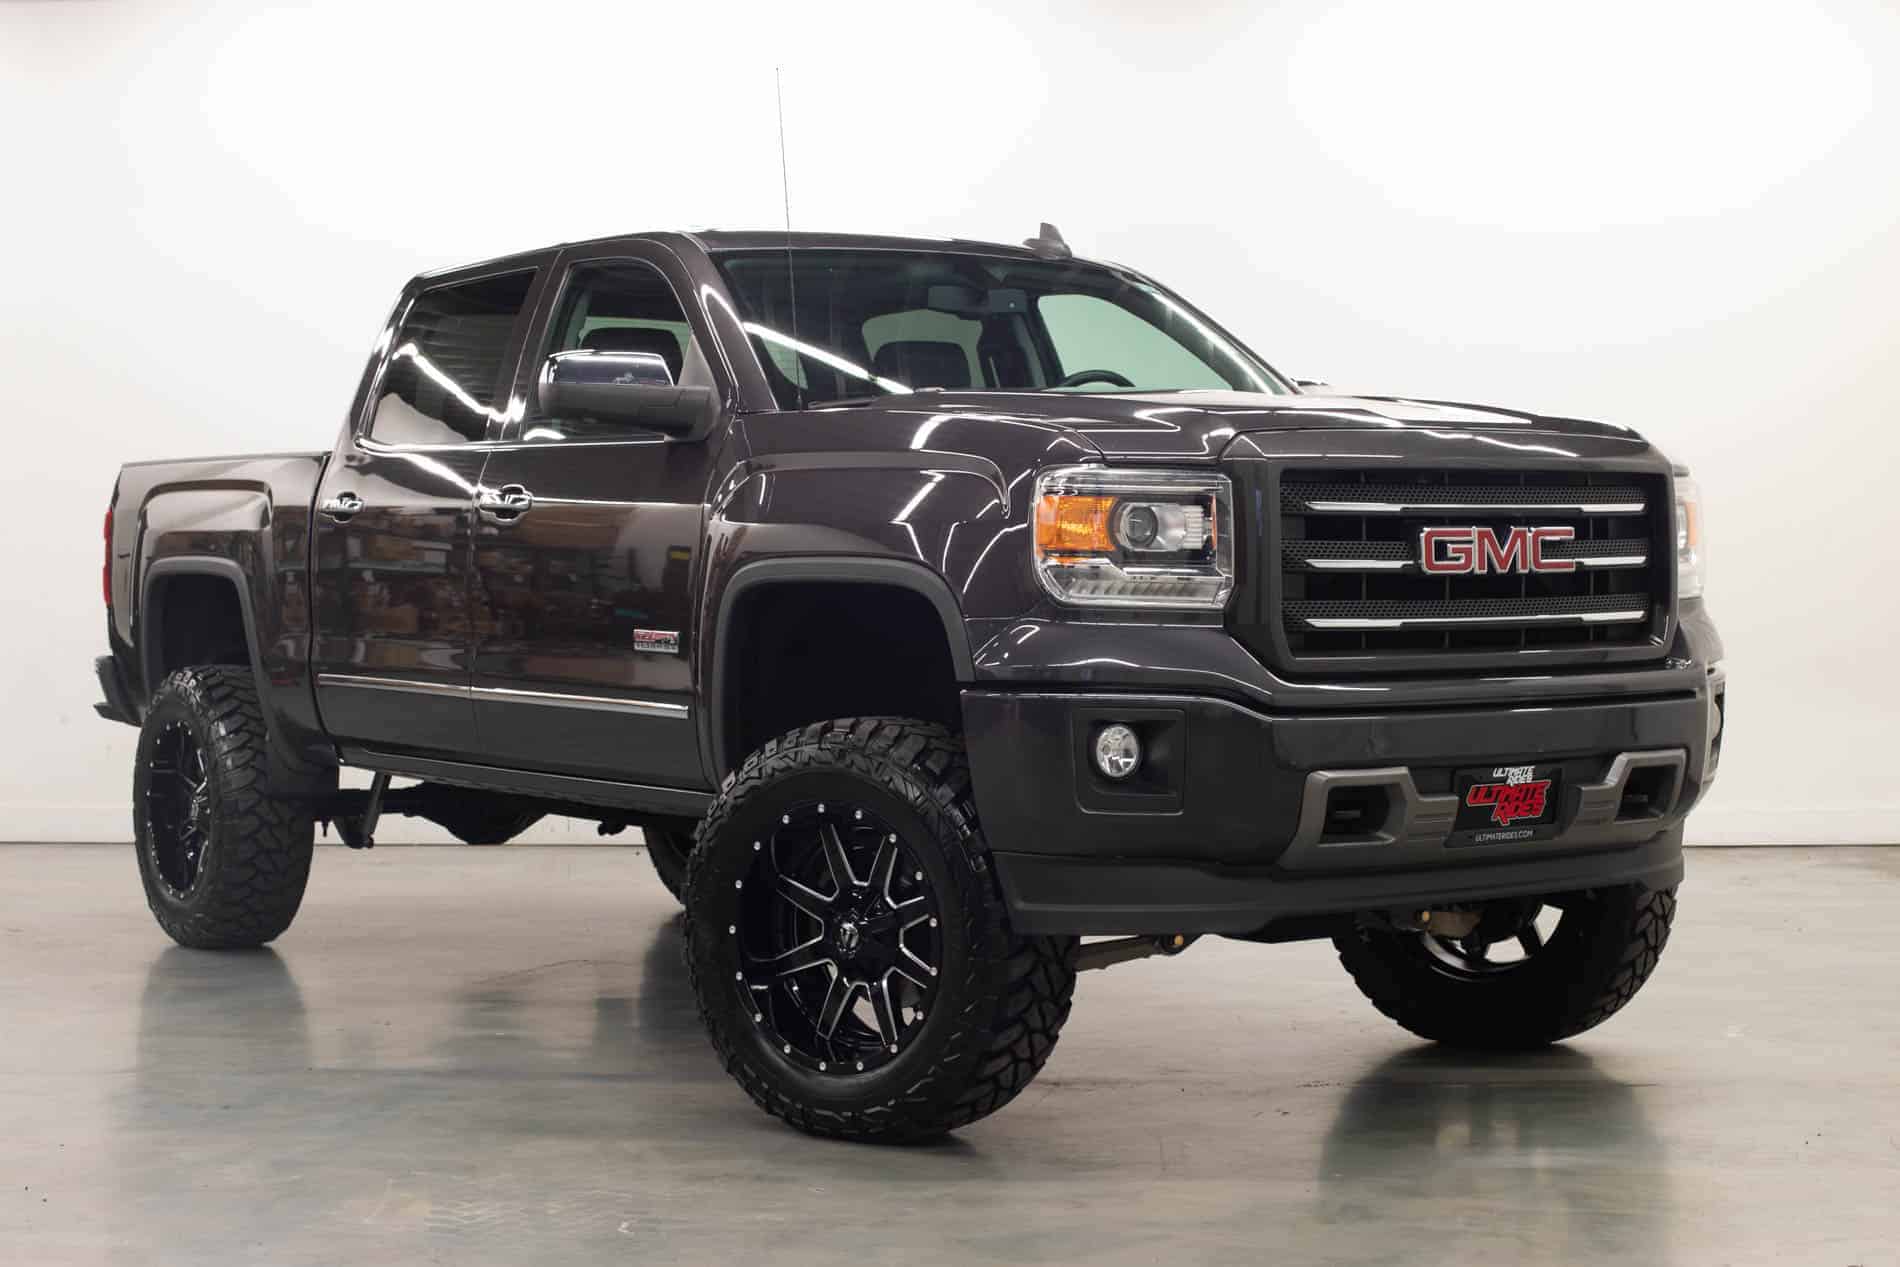 Lifted GMC Sierra 1500 for Sale